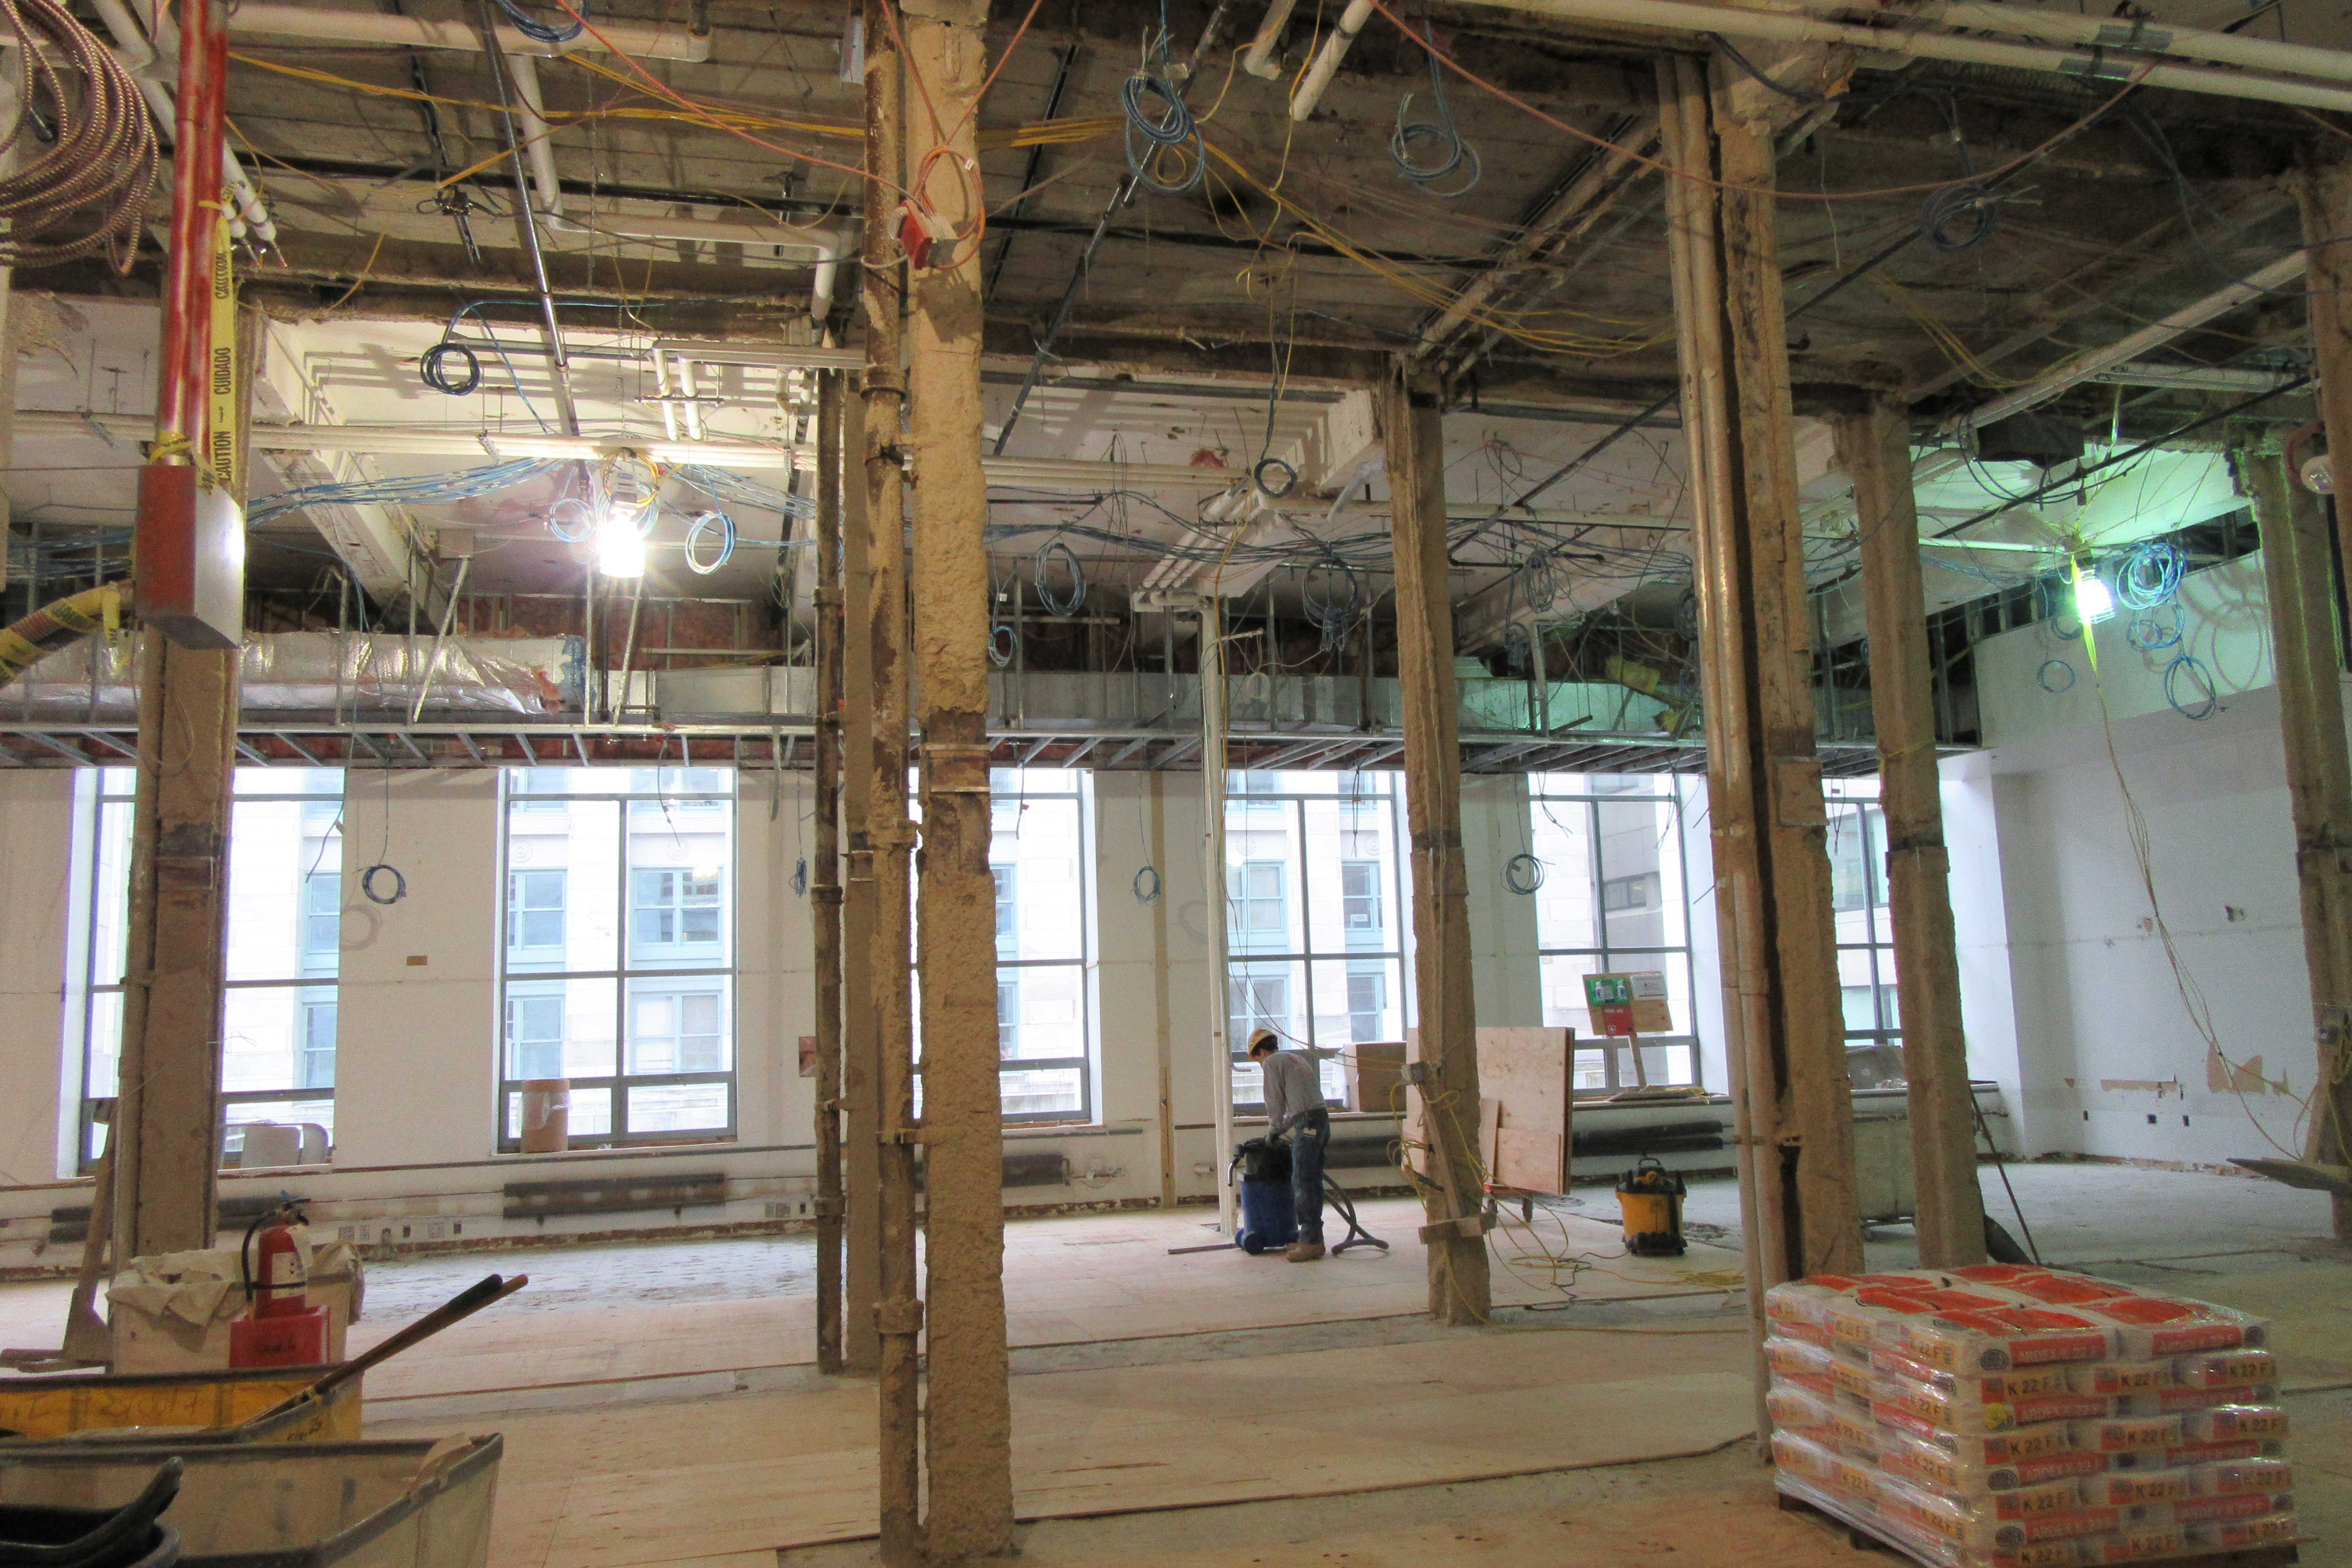 Gutted interior of area that will become the new student study center on TMEC's second floor. Image: M. Buckley